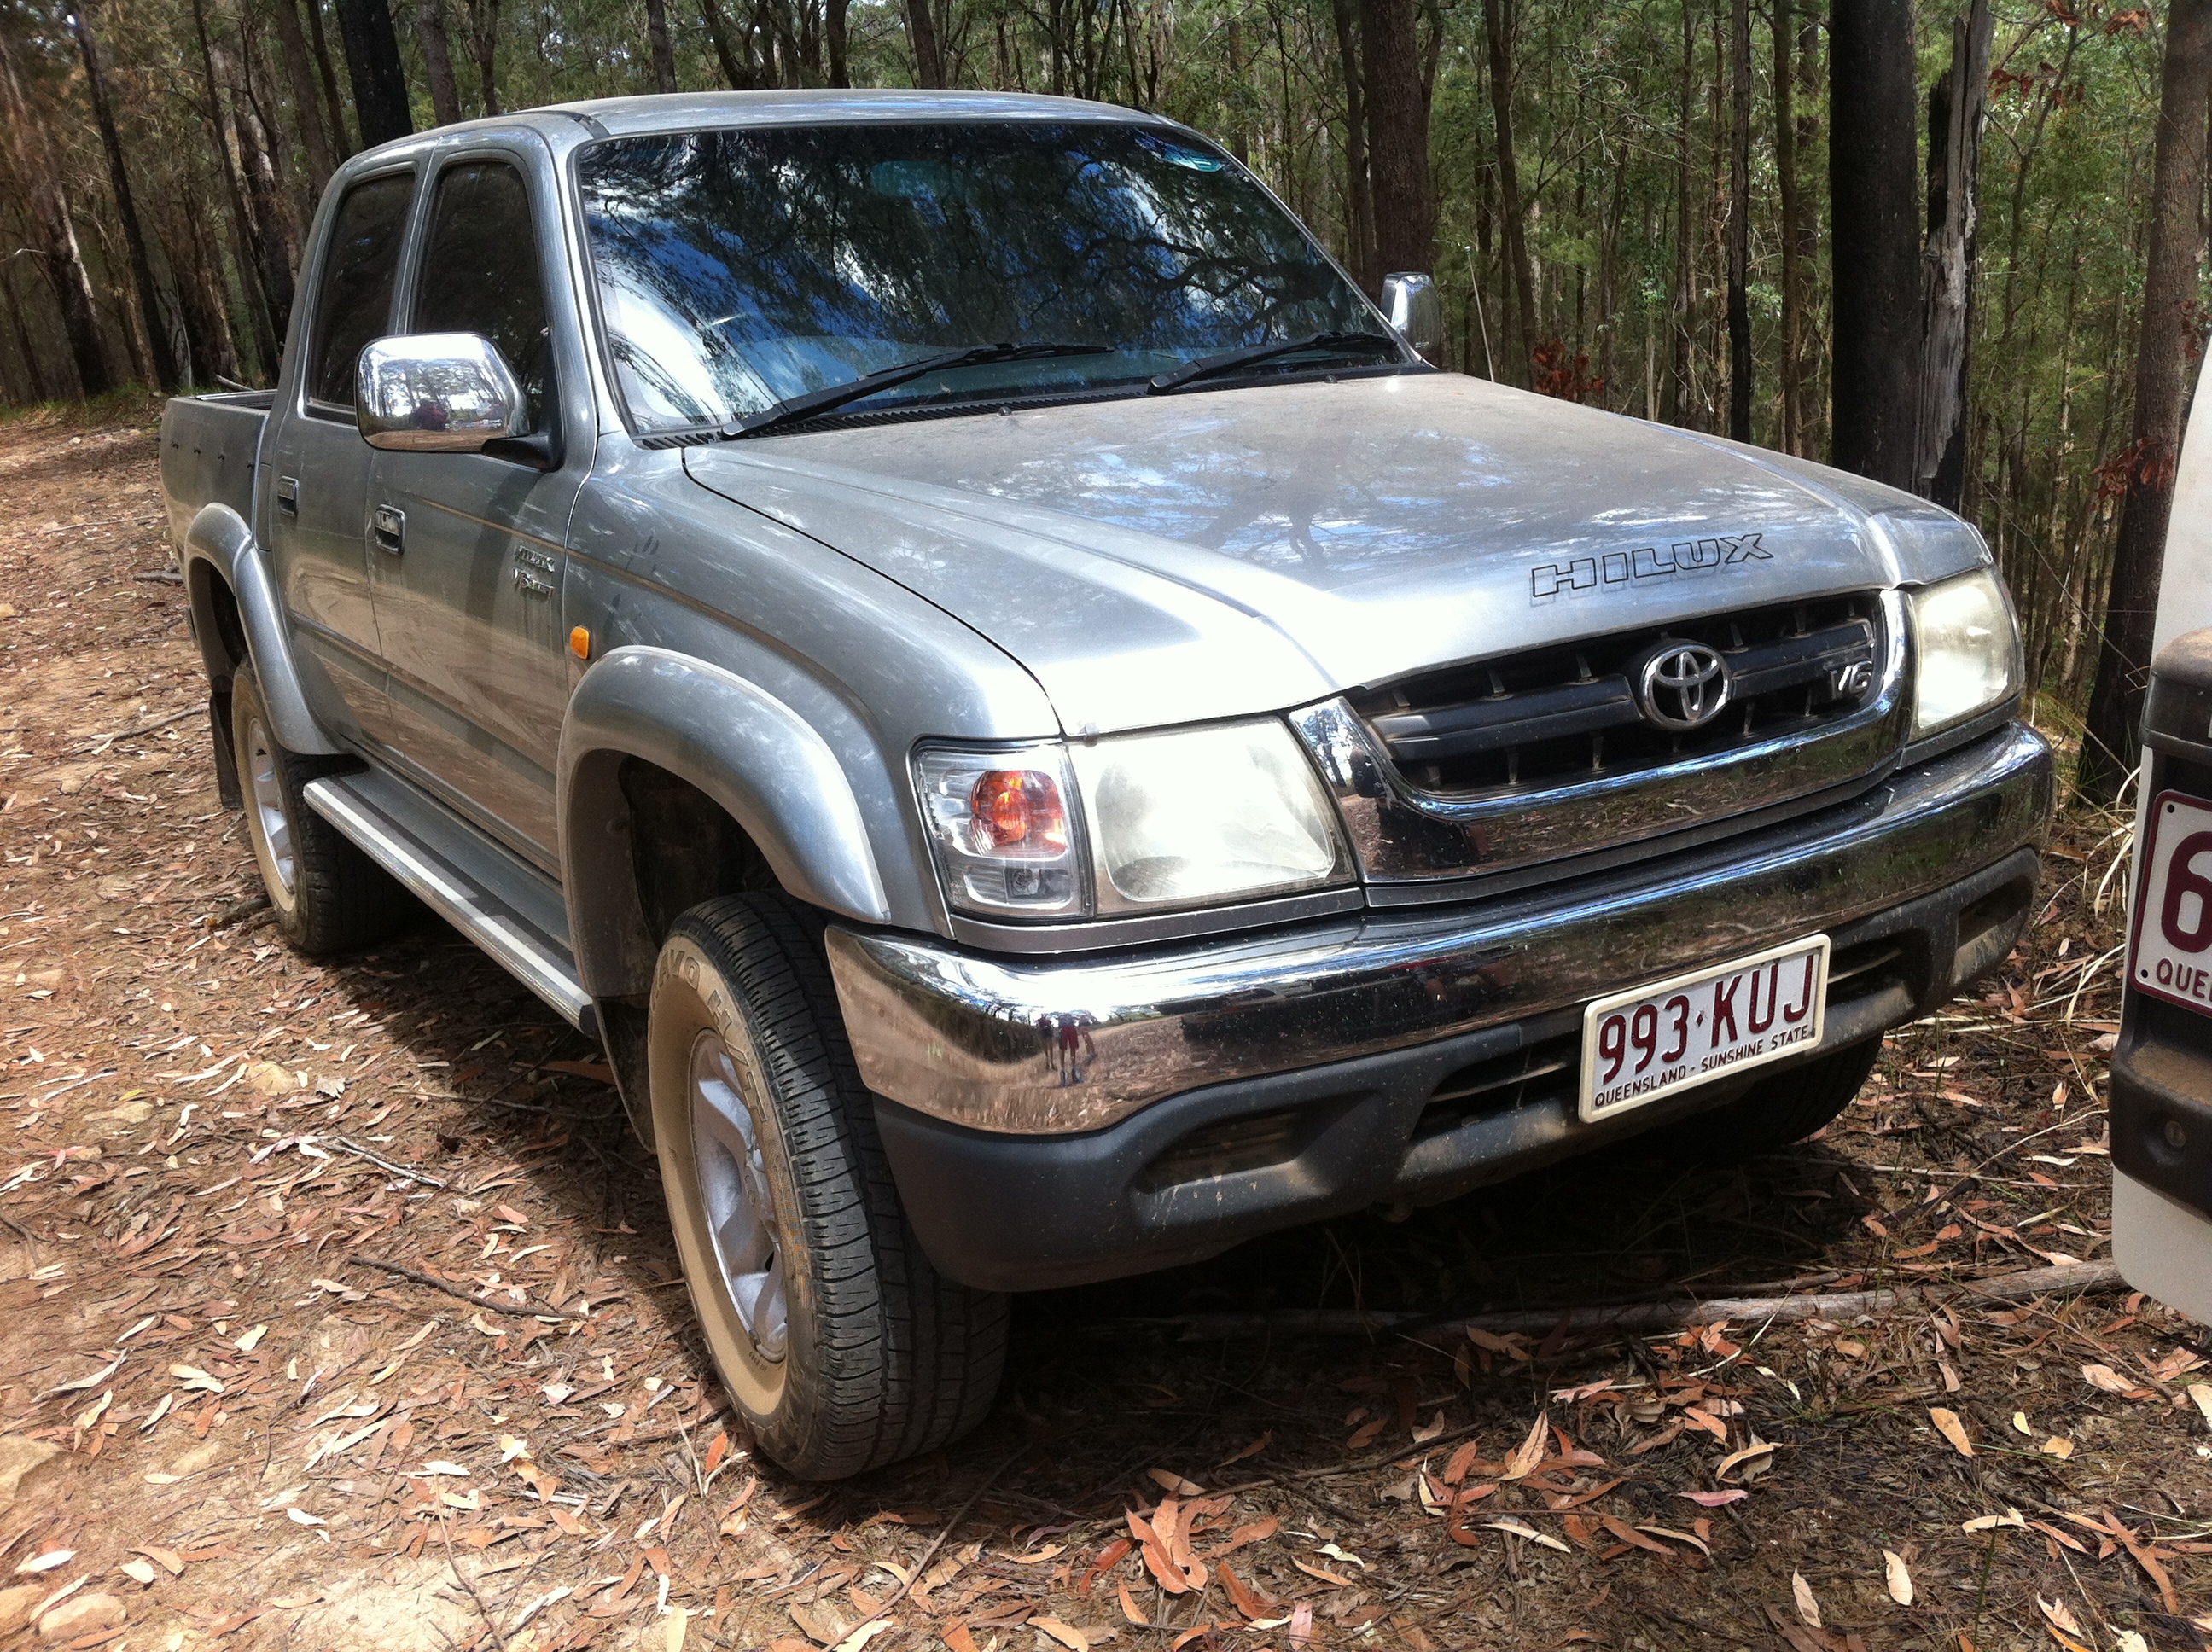 Toyota hilux for sale in north wales